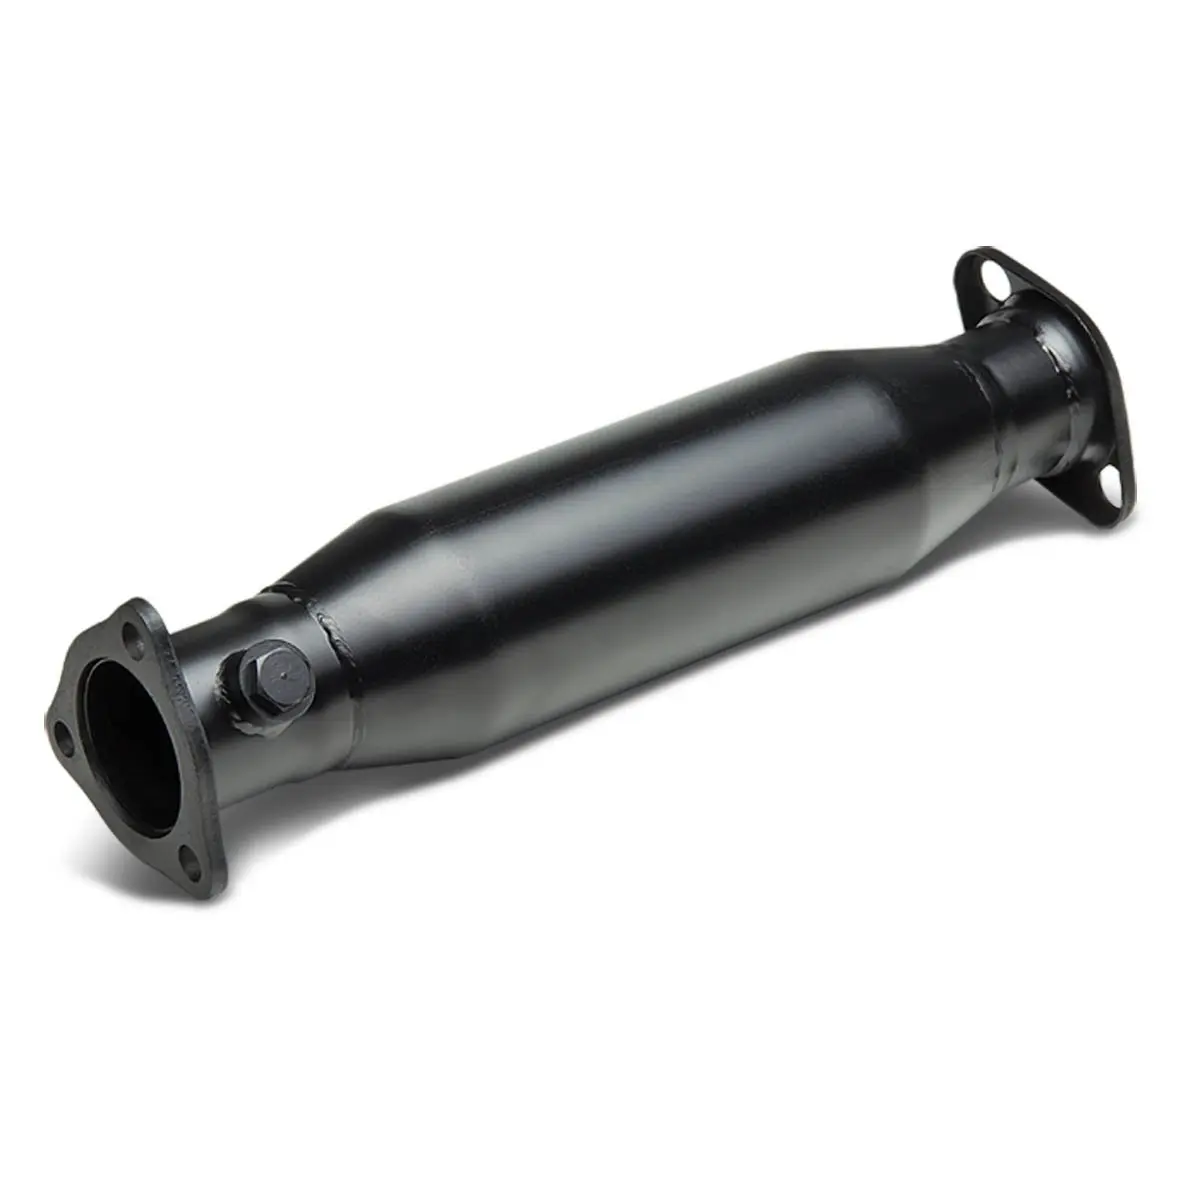 Cheap Civic Exhaust Tips, find Civic Exhaust Tips deals on line at